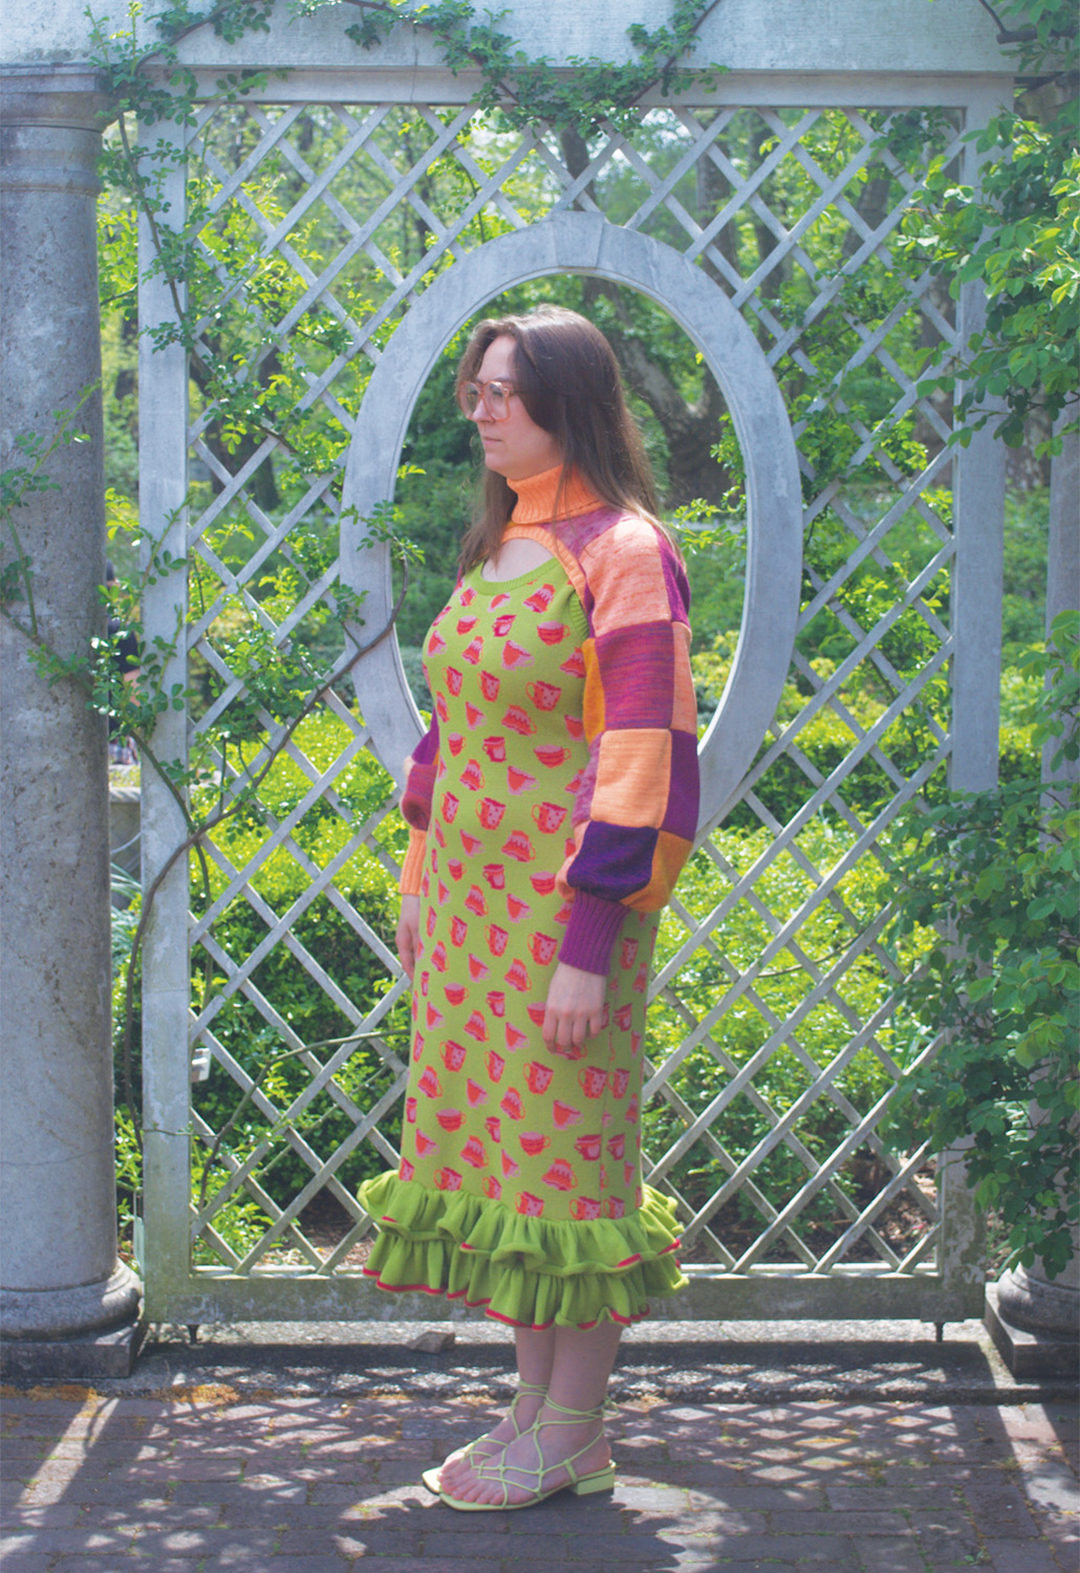 Three-quarter view photo of a model wearing a green teacup motif dress with a ruffle hem and a purple-and-orange patchwork turtleneck shrug. She is standing in front of an oval-shaped window.